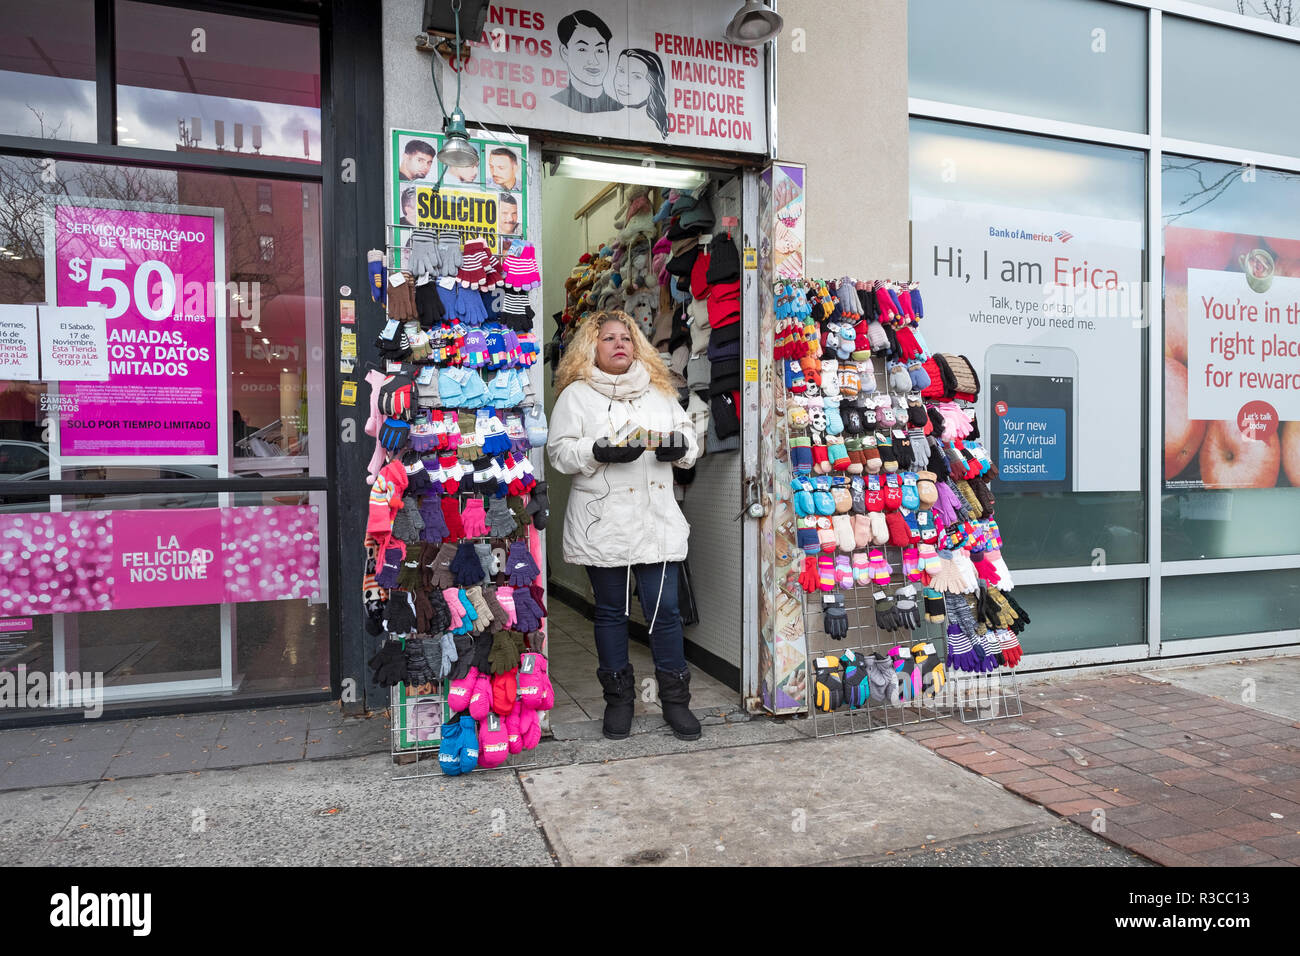 A blonde Latin American woman hands out leaflets outside a hair salon & tchotchke shop on Junction Boulevard in North Corona, Queens, New York City. Stock Photo